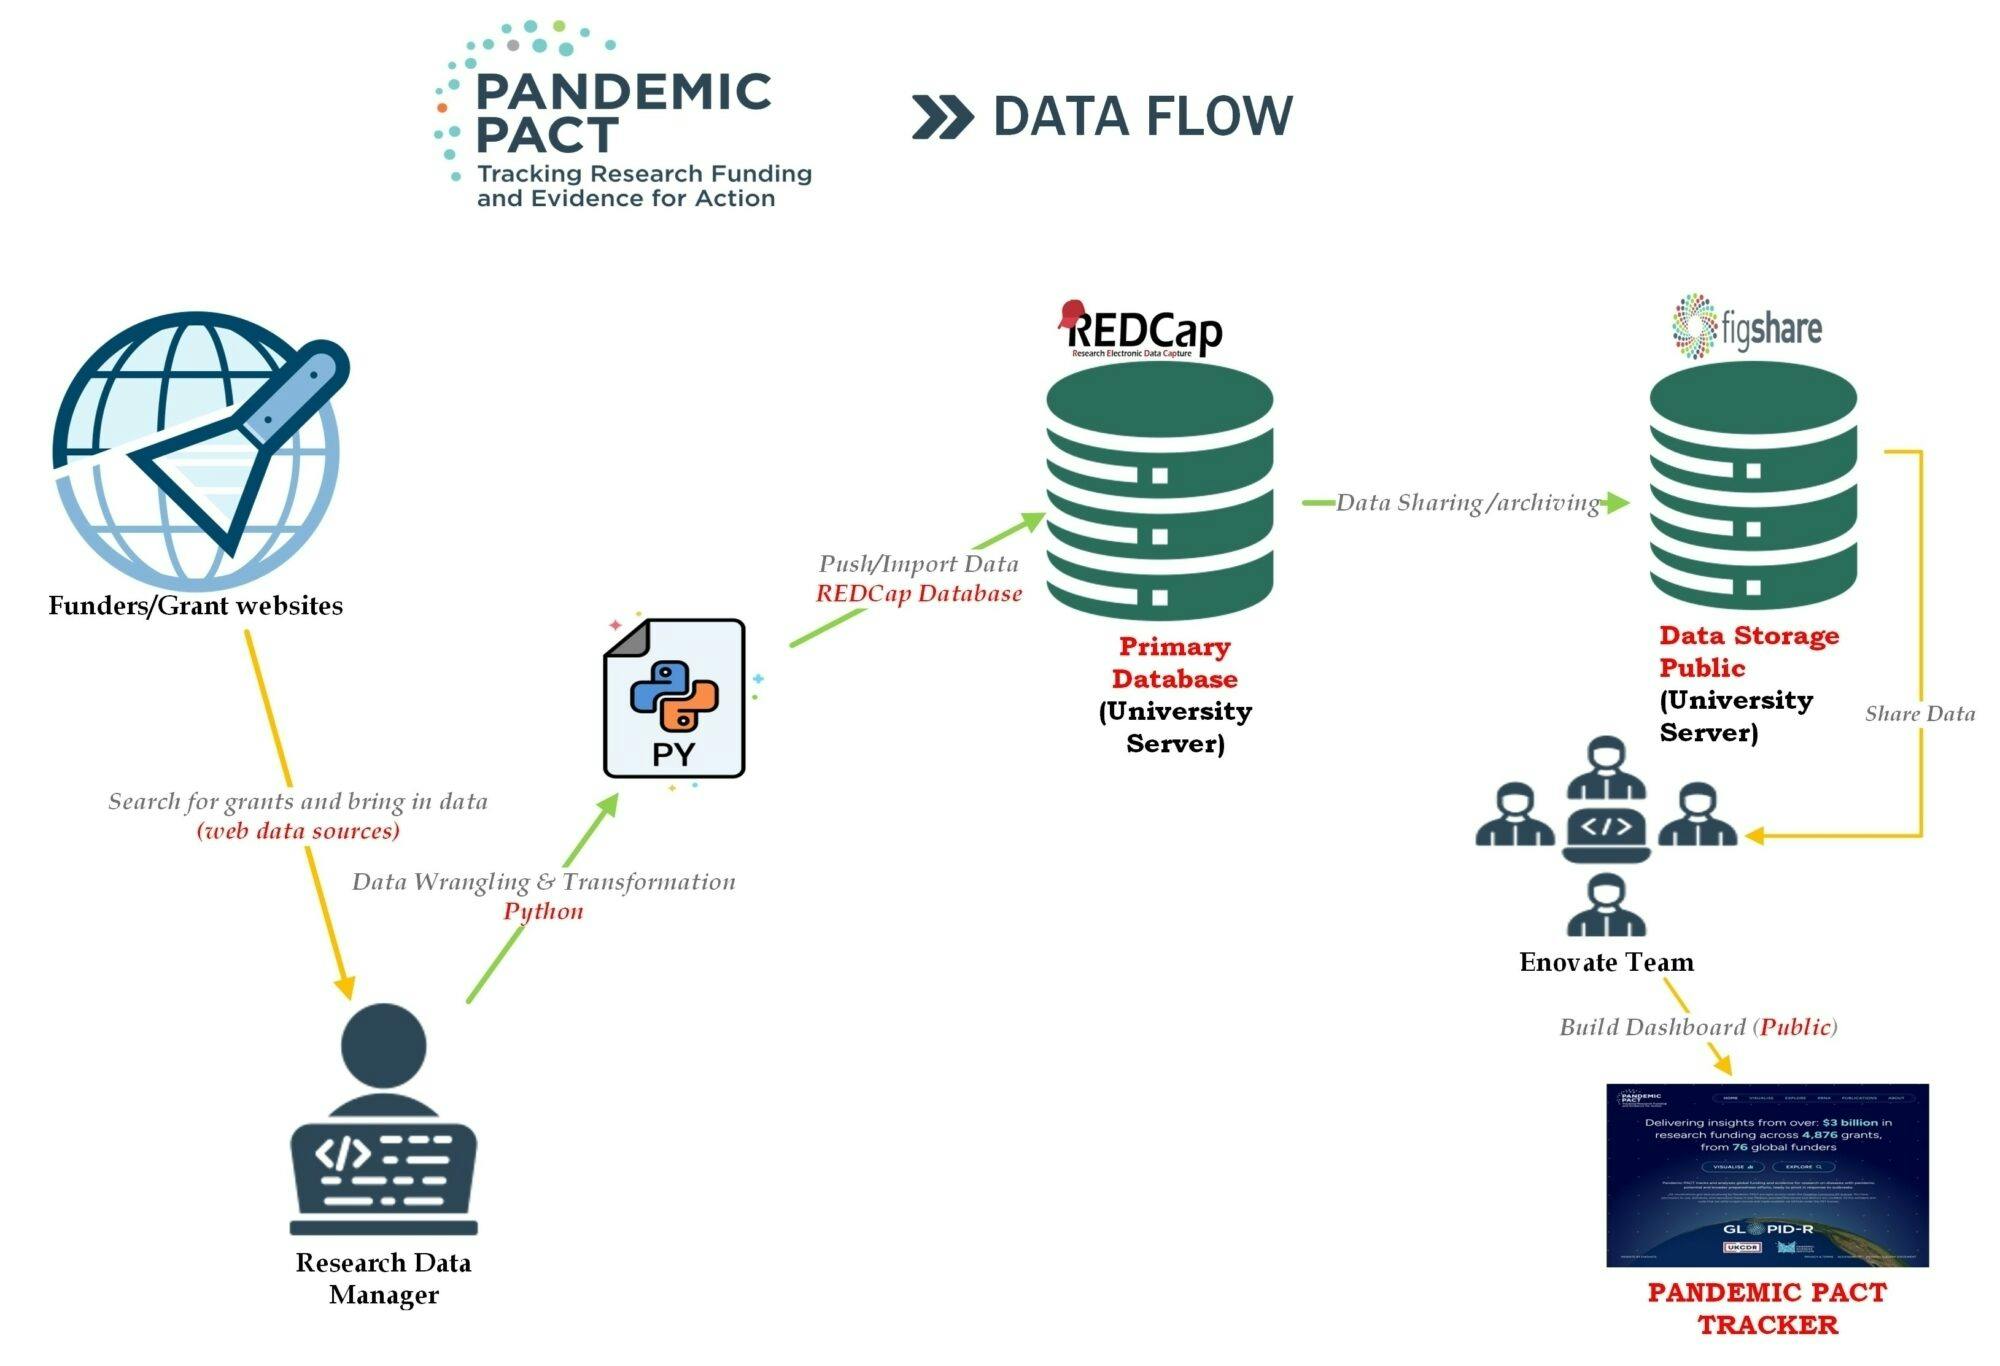 Pandemic PACT Data Flow